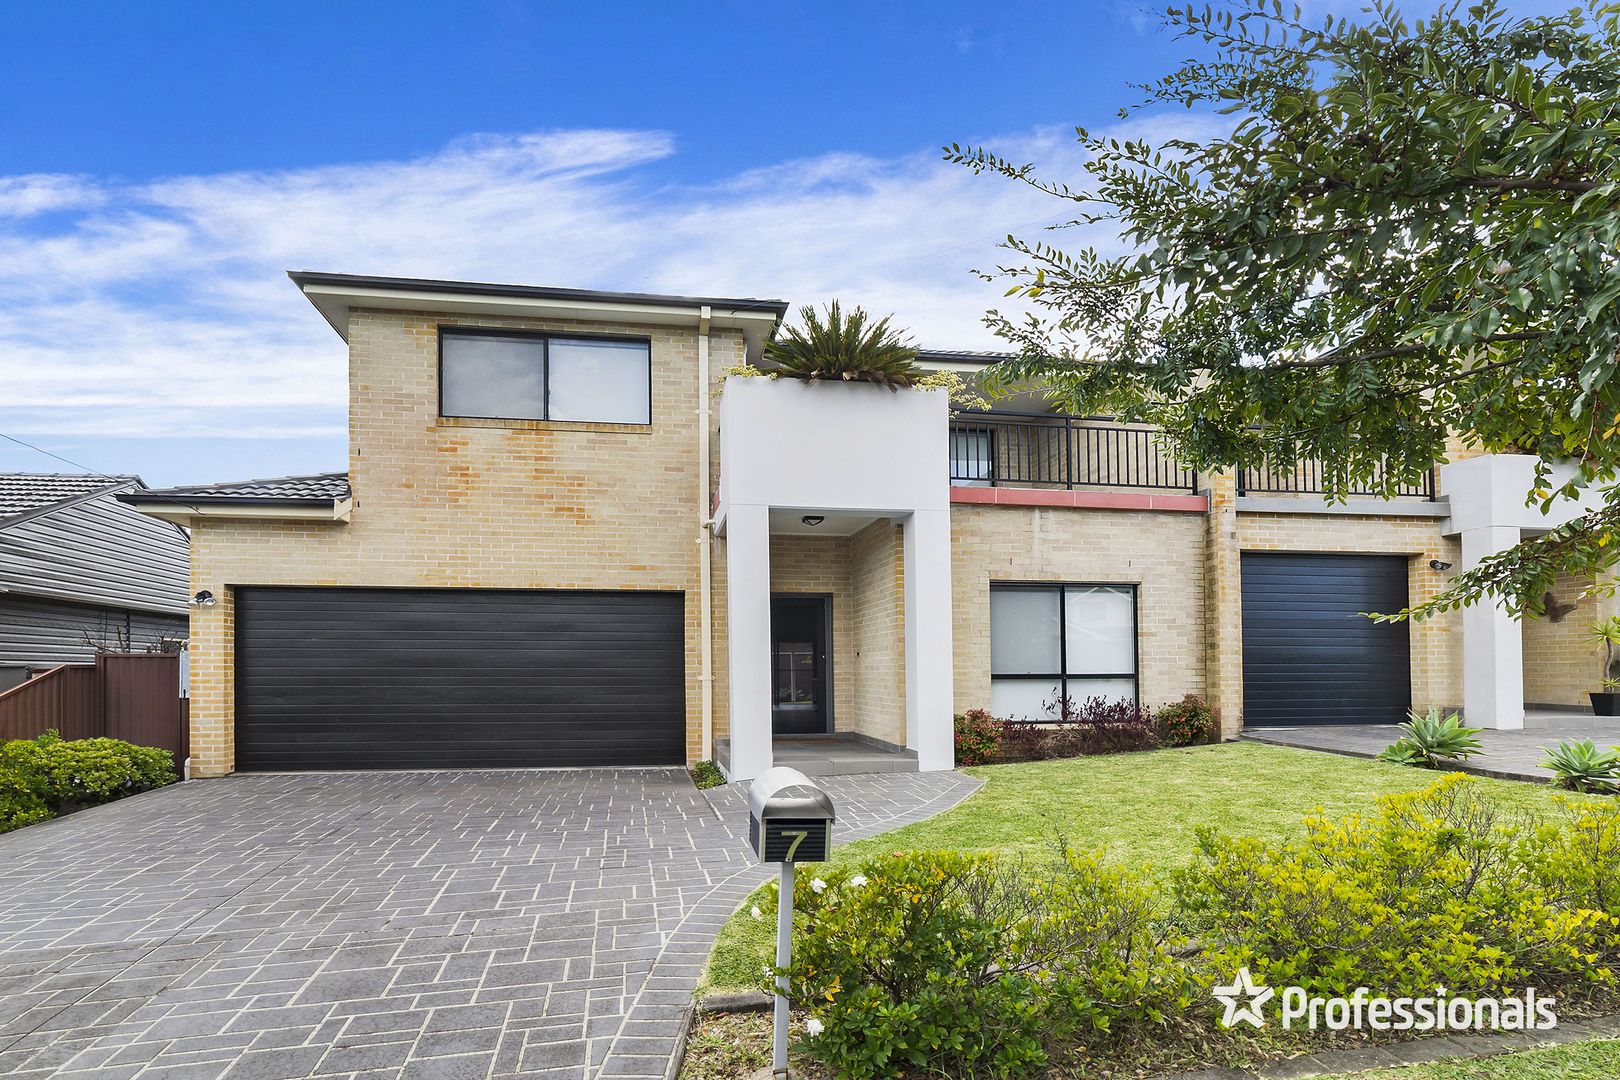 7 Lachlan Street, Revesby NSW 2212